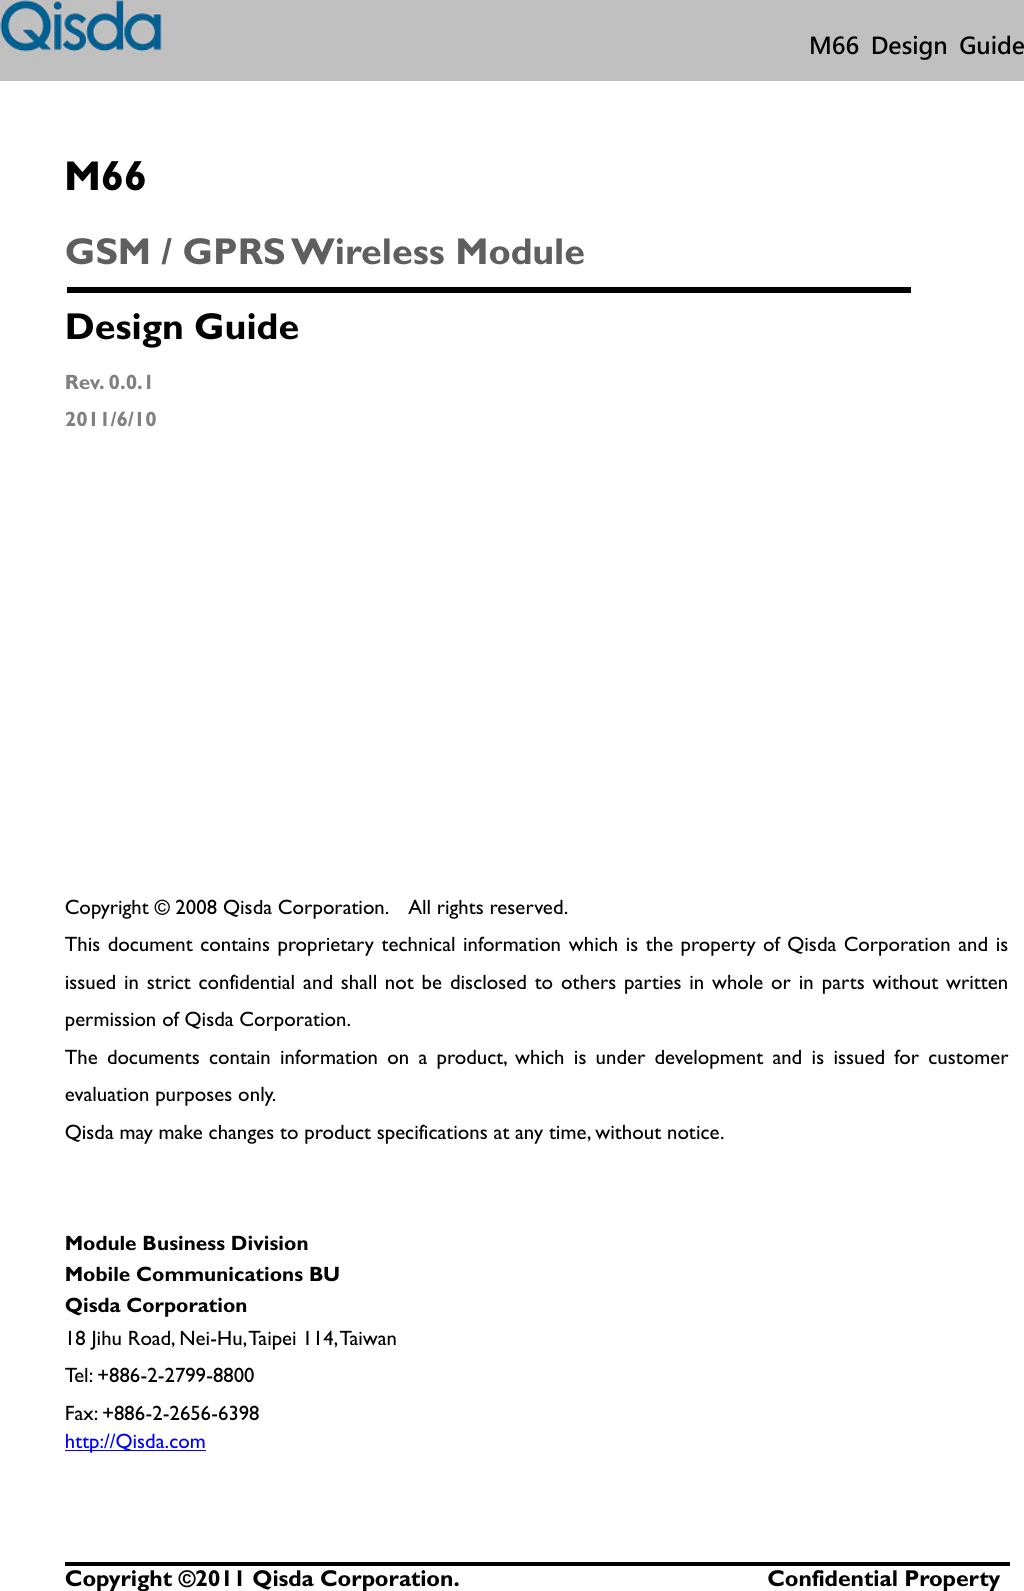   Copyright © 2011 Qisda Corporation.                           Confidential Property M66  Design  Guide  M66 GSM / GPRS Wireless Module Design Guide Rev. 0.0.1 2011/6/10             Copyright ©  2008 Qisda Corporation.    All rights reserved. This document contains proprietary technical information which is the property of Qisda Corporation and is issued in strict confidential and shall not be disclosed to  others parties in whole or in parts without written permission of Qisda Corporation. The  documents  contain  information  on  a  product,  which  is  under  development  and  is  issued  for  customer evaluation purposes only.   Qisda may make changes to product specifications at any time, without notice.   Module Business Division Mobile Communications BU Qisda Corporation 18 Jihu Road, Nei-Hu, Taipei 114, Taiwan Tel: +886-2-2799-8800 Fax: +886-2-2656-6398 http://Qisda.com 